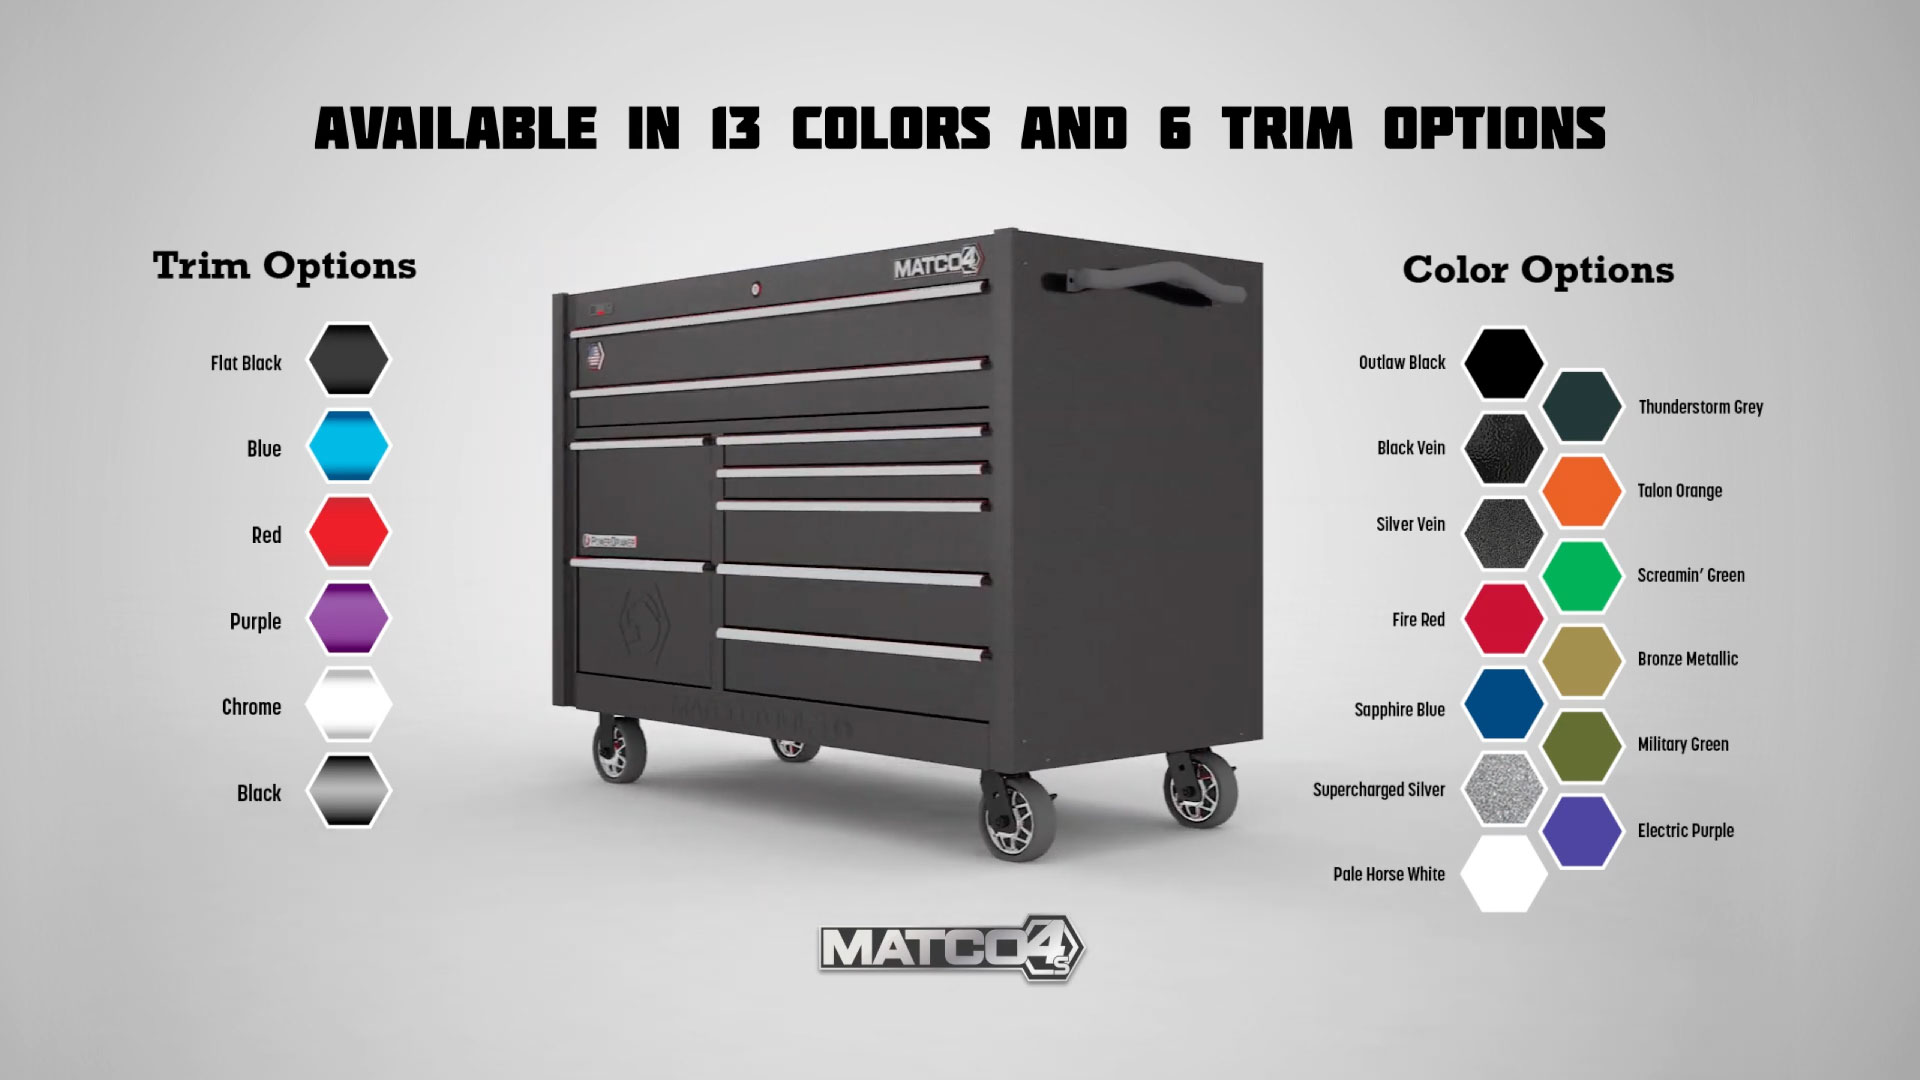 MATCO Product Features/Benefits Video